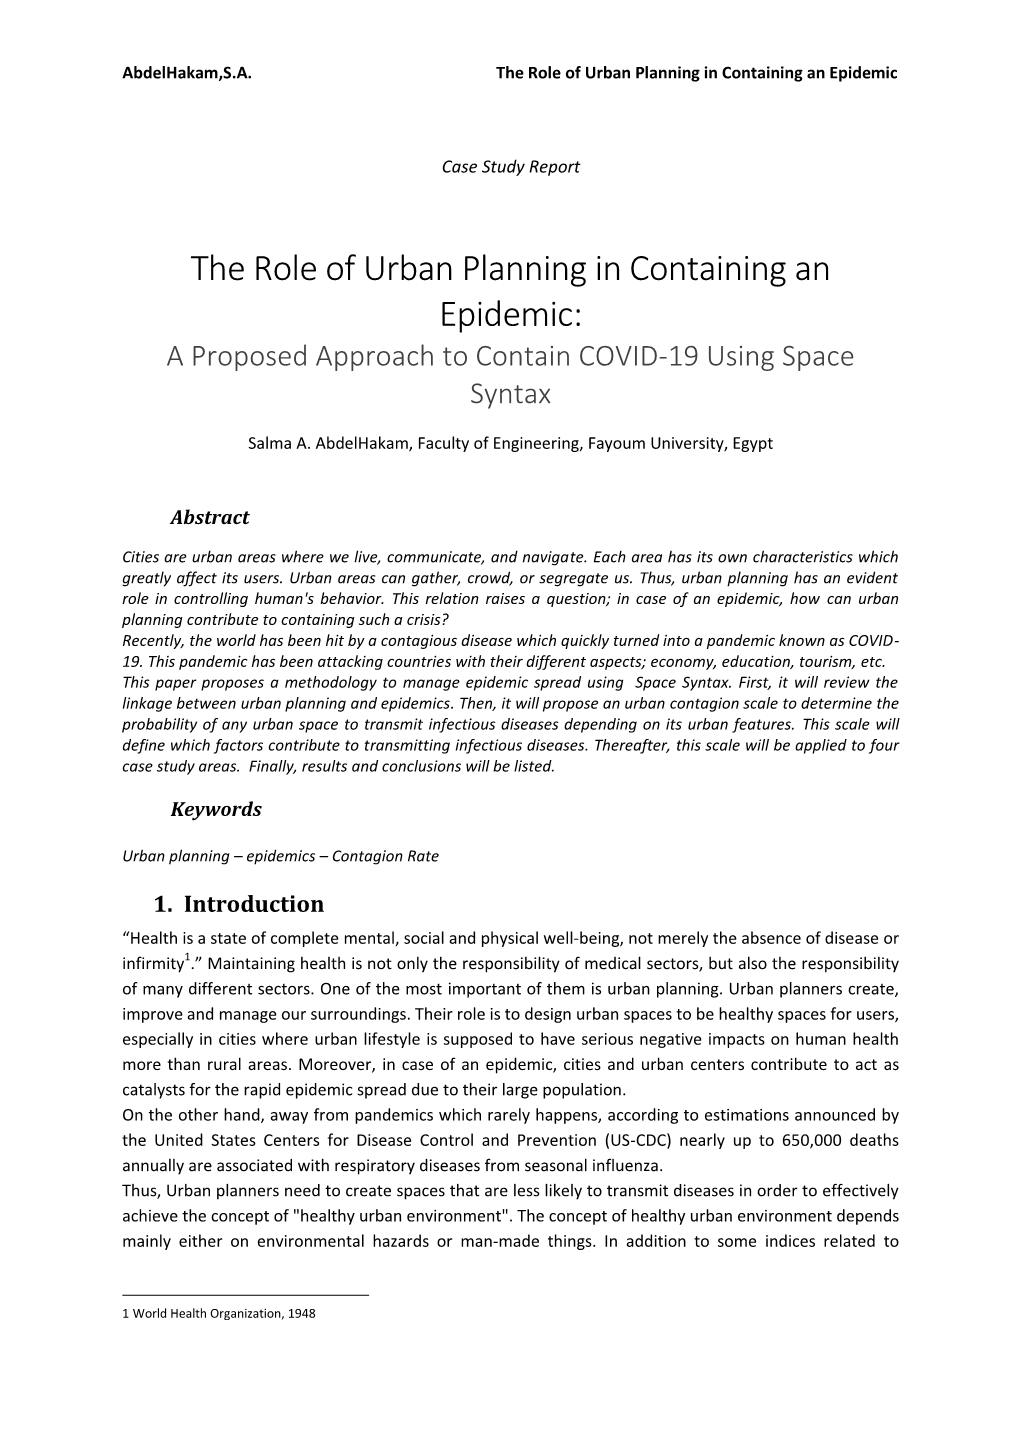 The Role of Urban Planning in Containing an Epidemic: a Proposed Approach to Contain COVID-19 Using Space Syntax